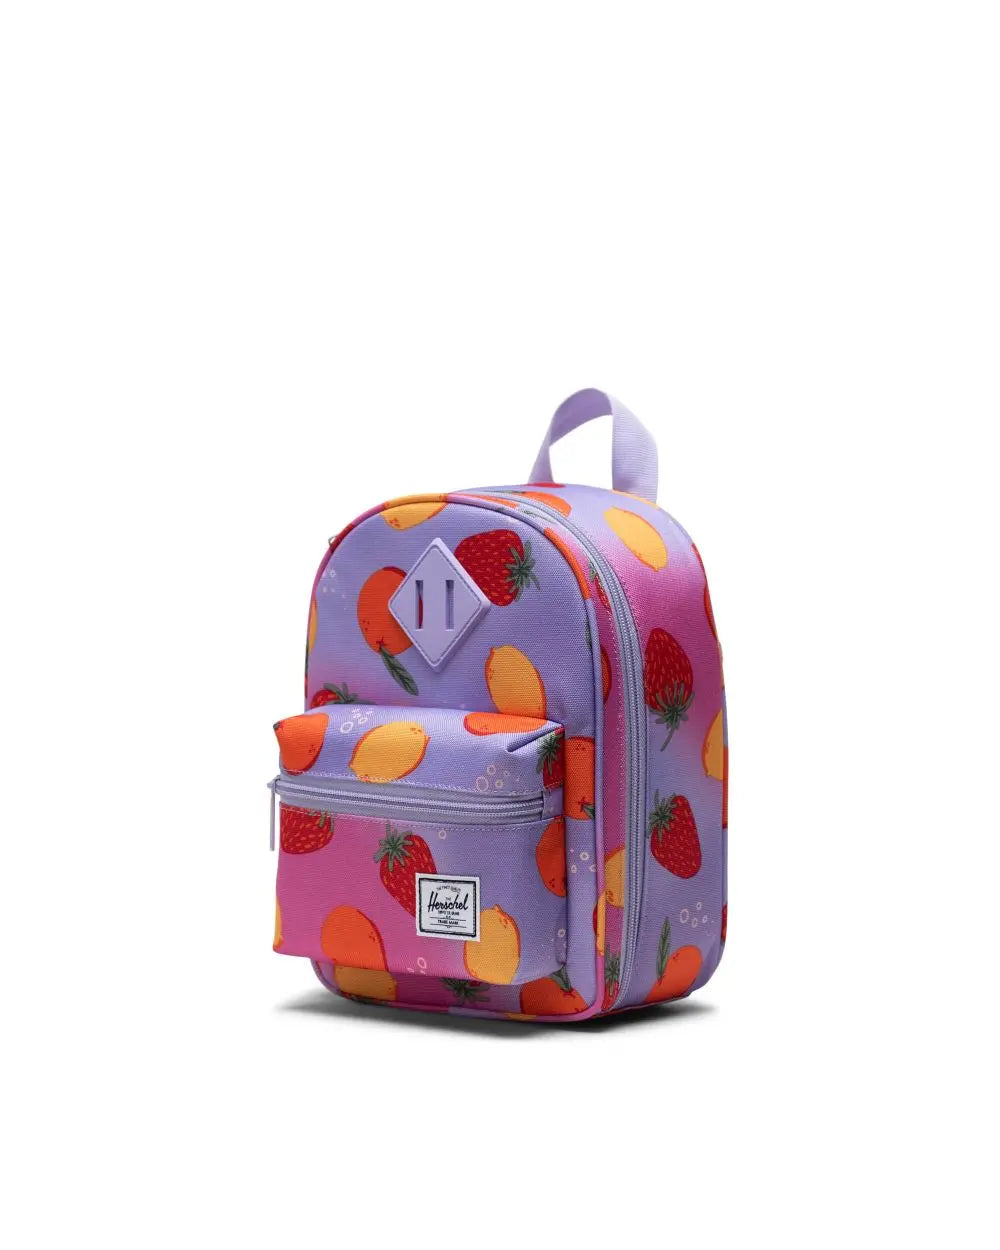 Heritage Lunchbox/Fruit Punch – Heart of Gold Kids